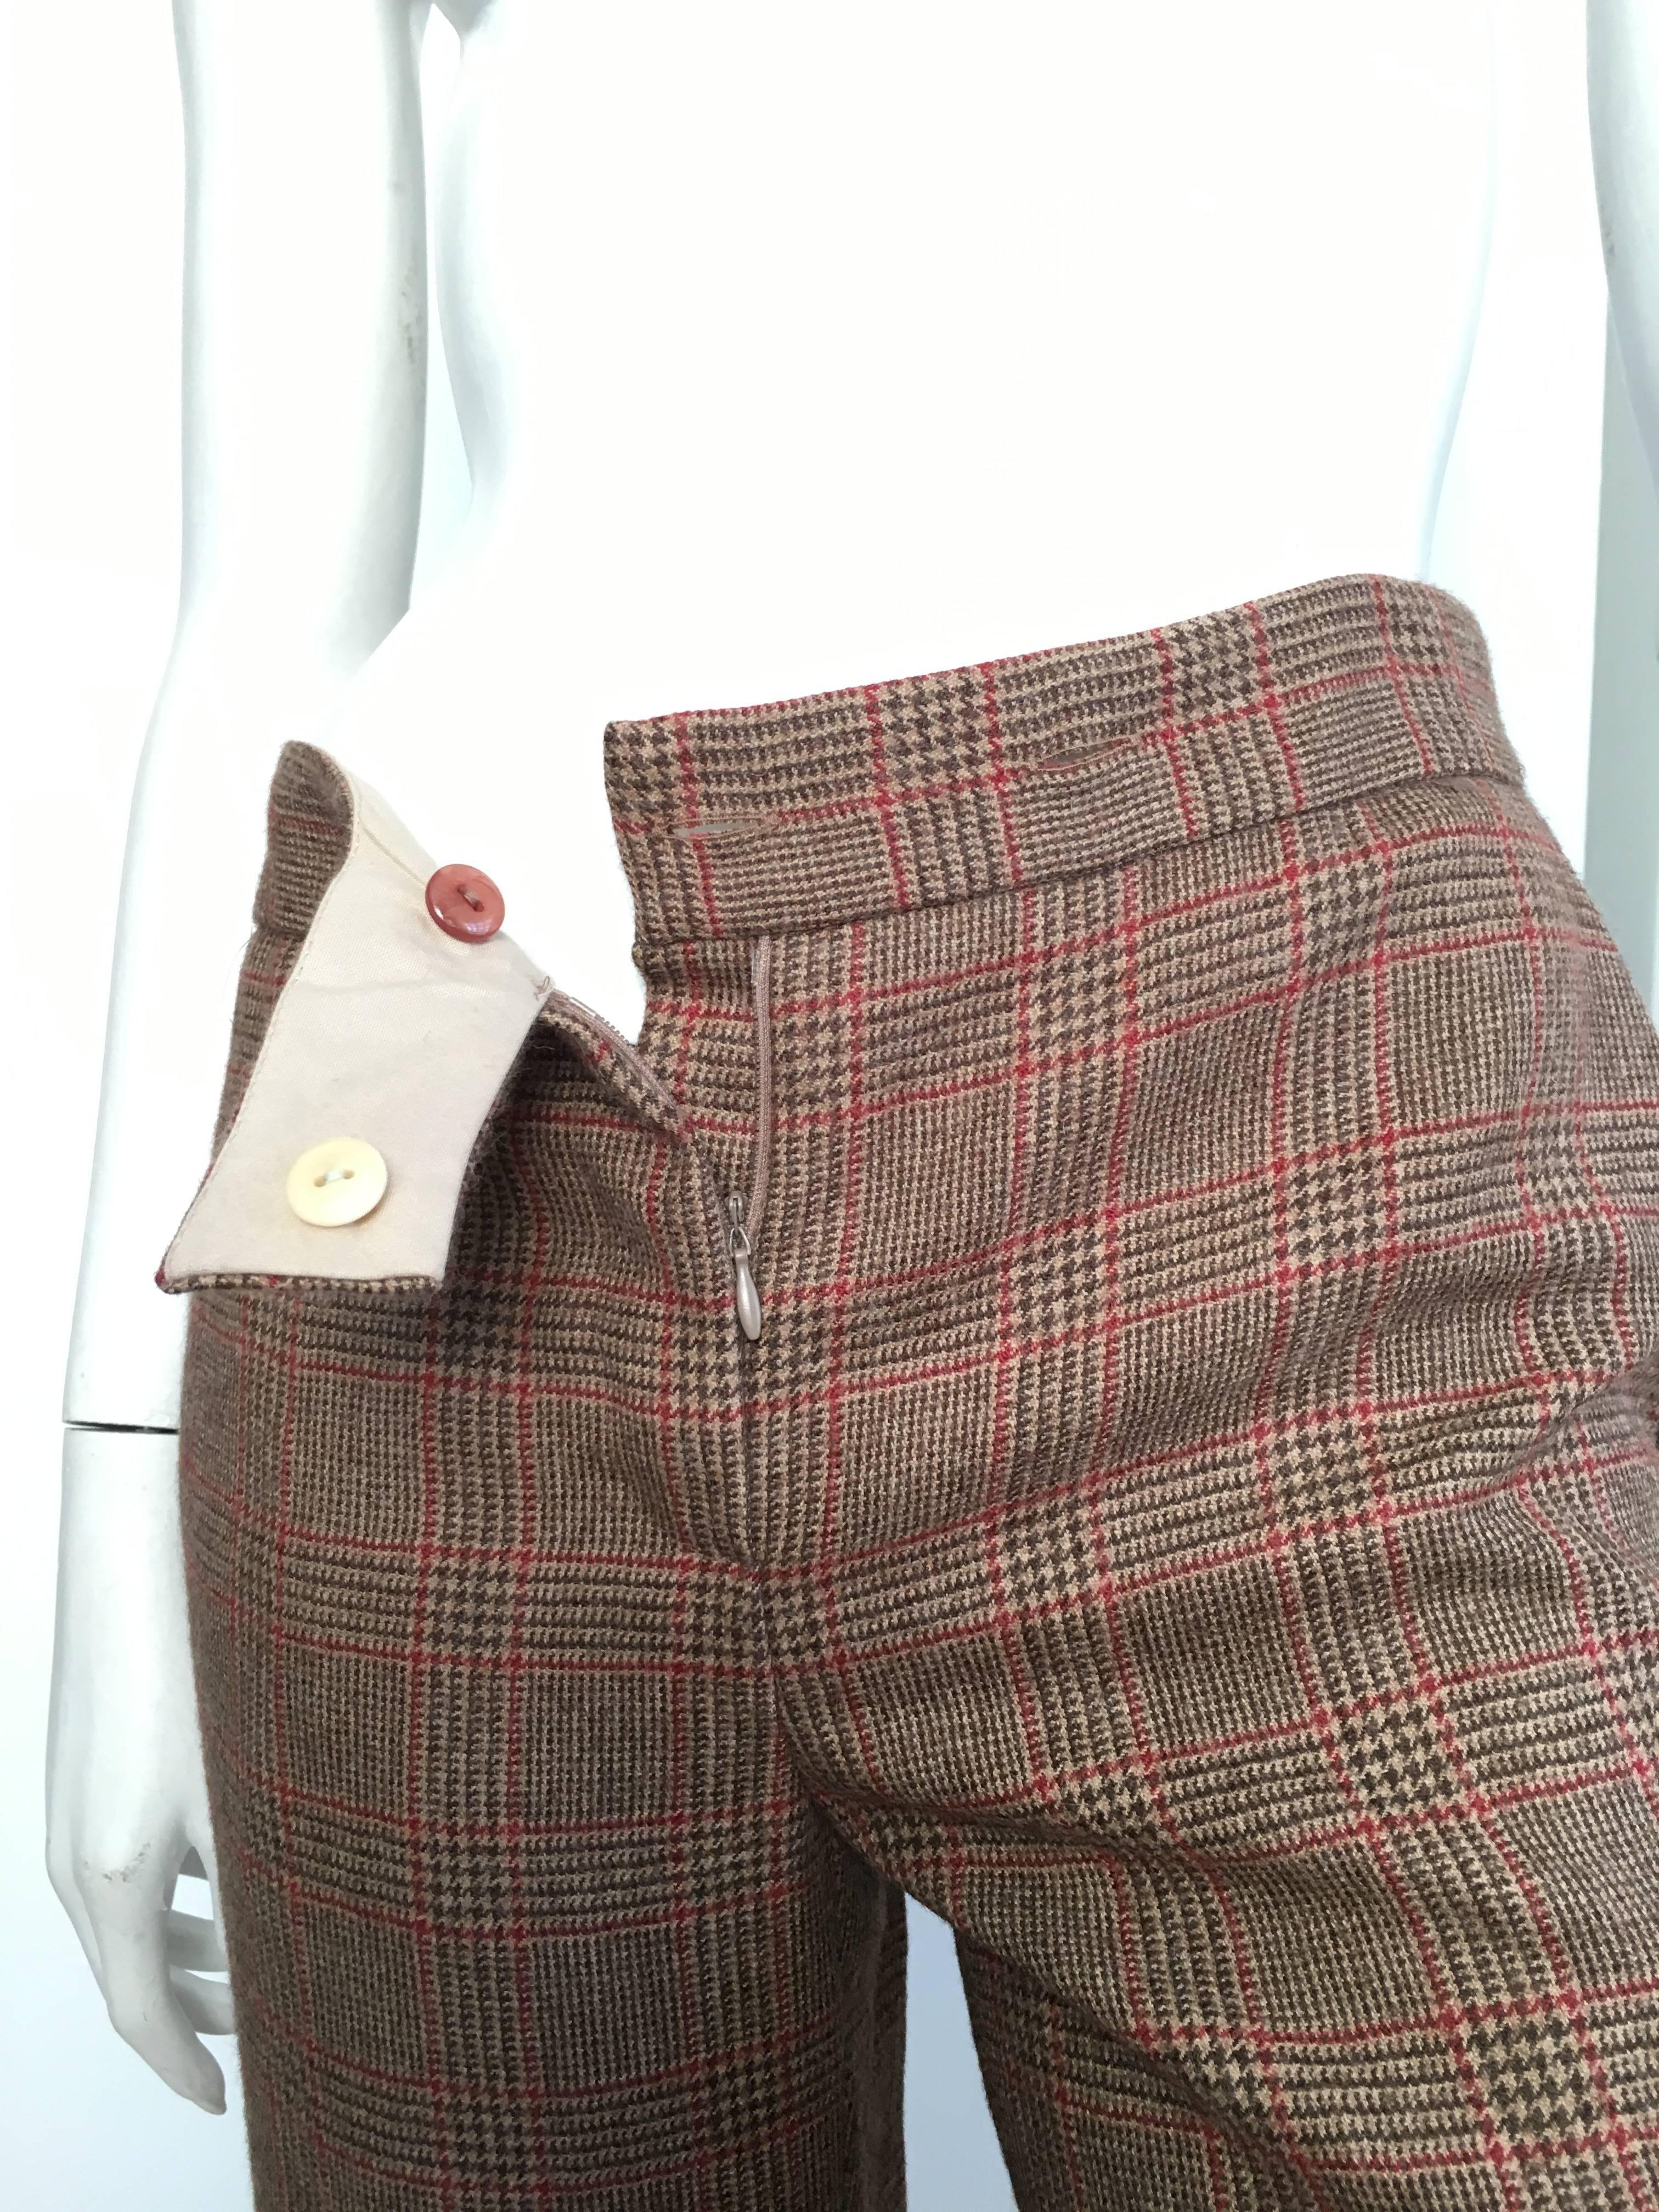 Blumarine Glen Plaid Wool Pants with Pockets, Size 4  For Sale 2